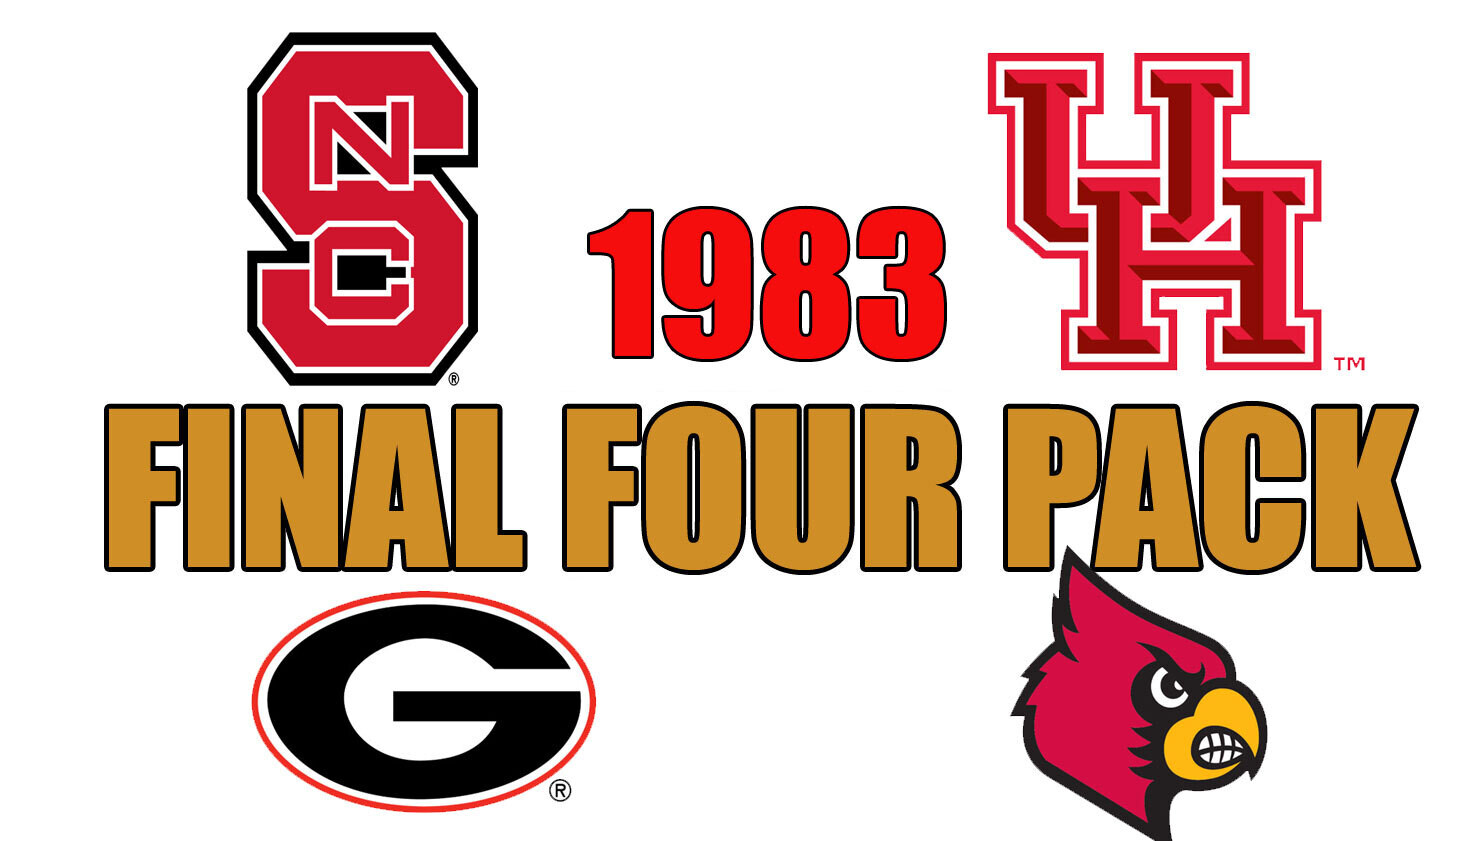 1983 Final Four Pack (BL Library)